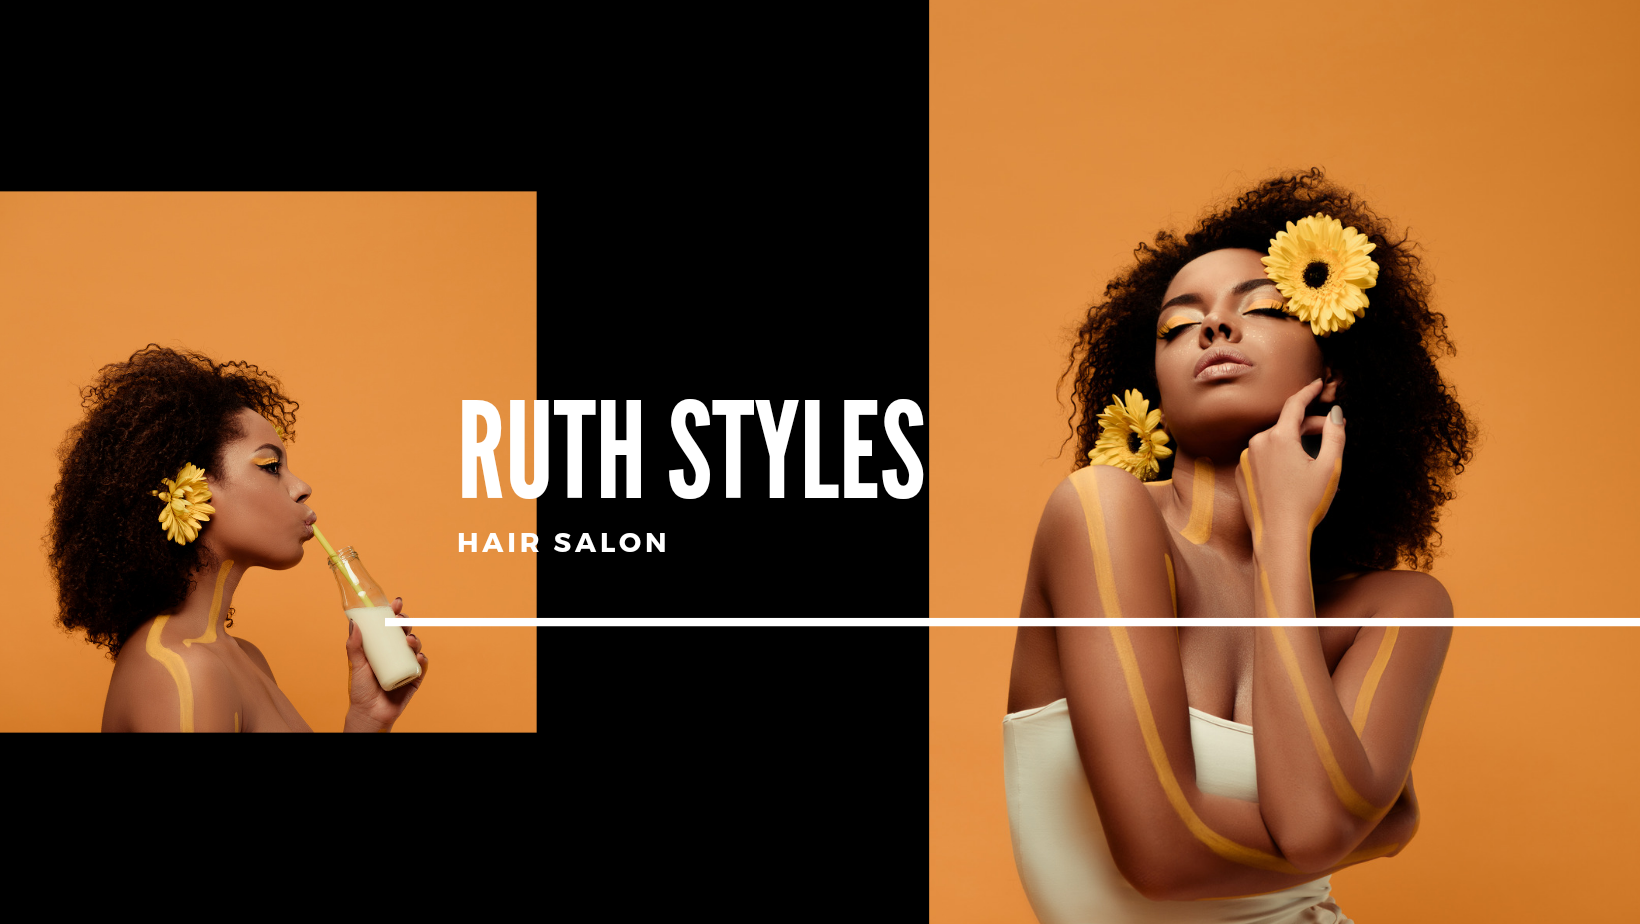 https://www.blacklax.org/wp-content/uploads/2022/03/ruth-styles-hair-salon.png